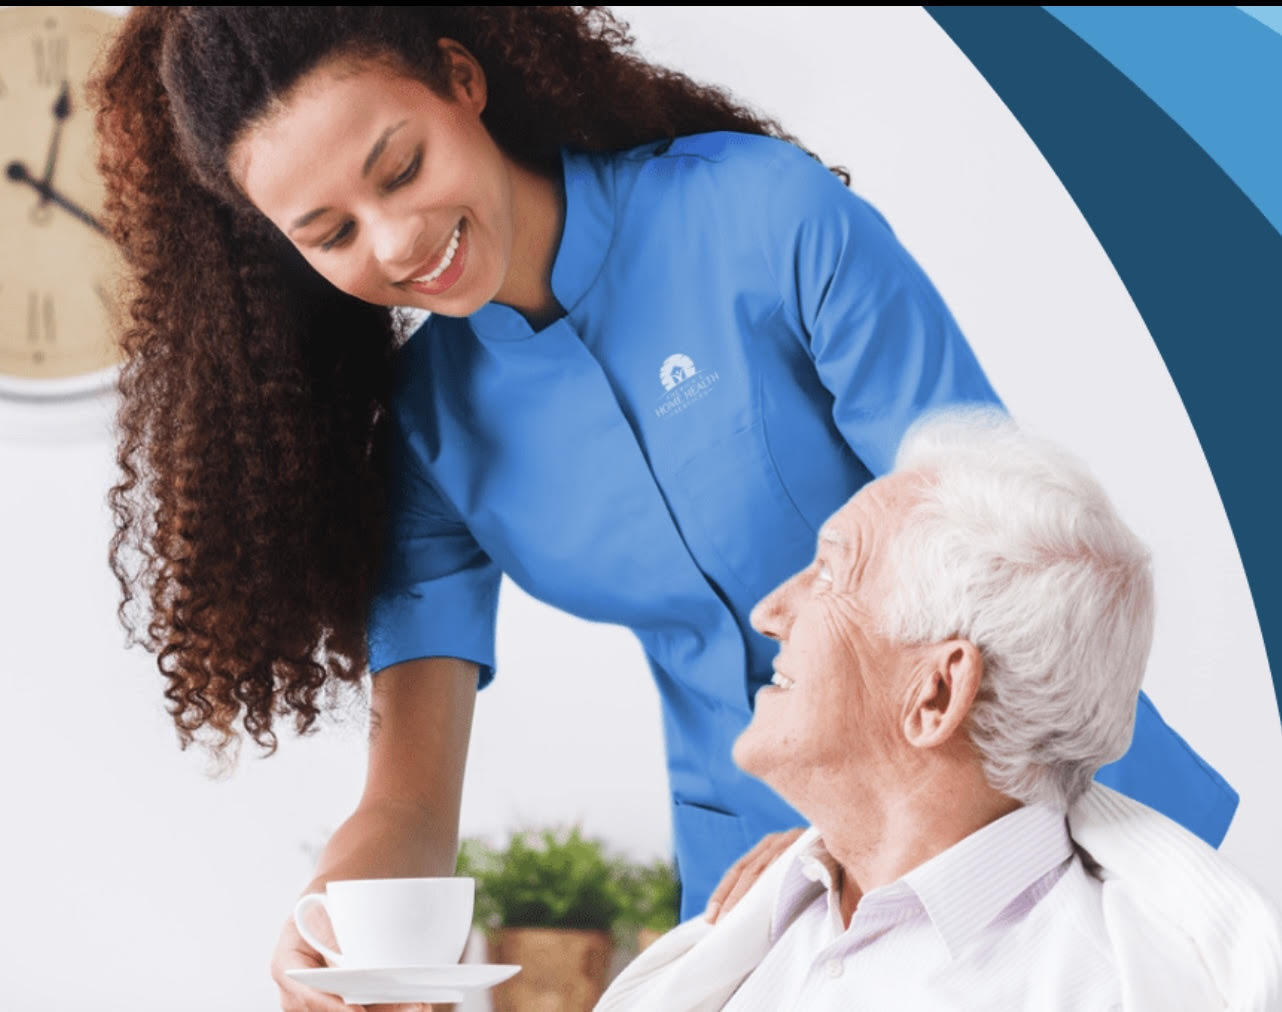 Elderly Care Services in Downers Grove, IL